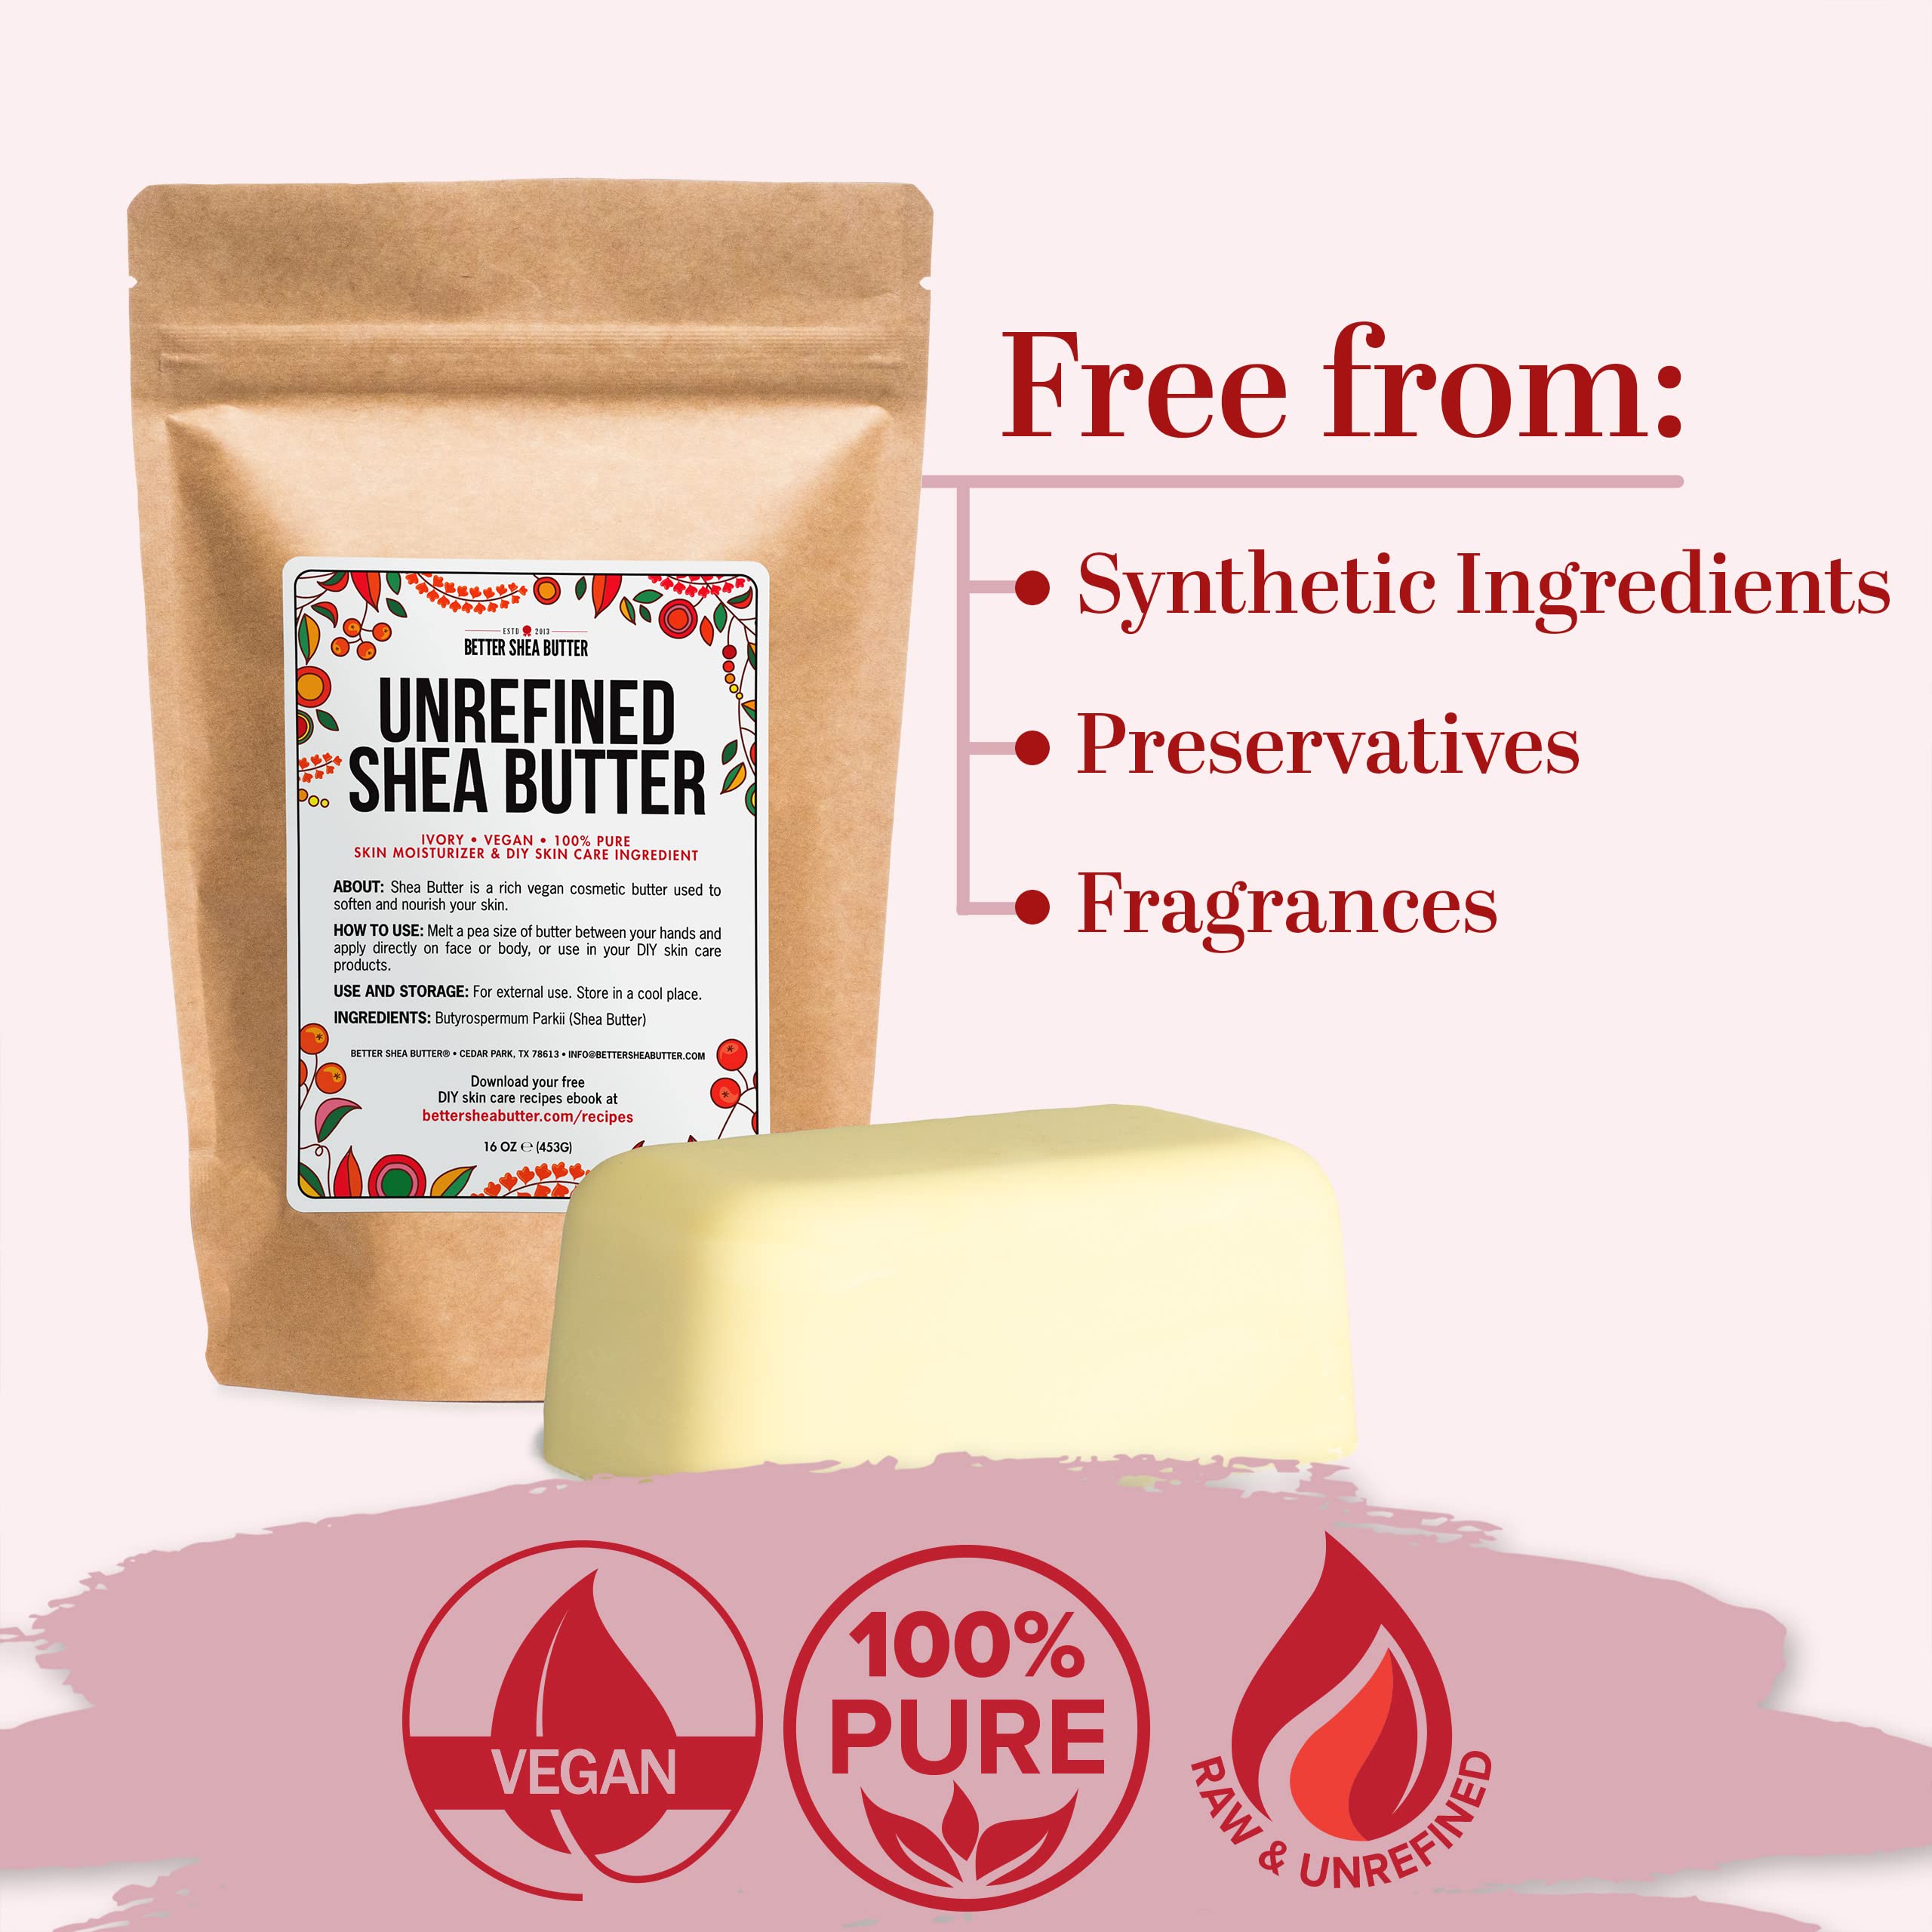 Better Shea Butter Raw Shea Butter - 100% Pure African Unrefined Shea Butter for Hair - Skin Moisturizer for Face, Body and for Soap Making Base and DIY Whipped Lotion, Oil and Lip Balm - 1 lb Block